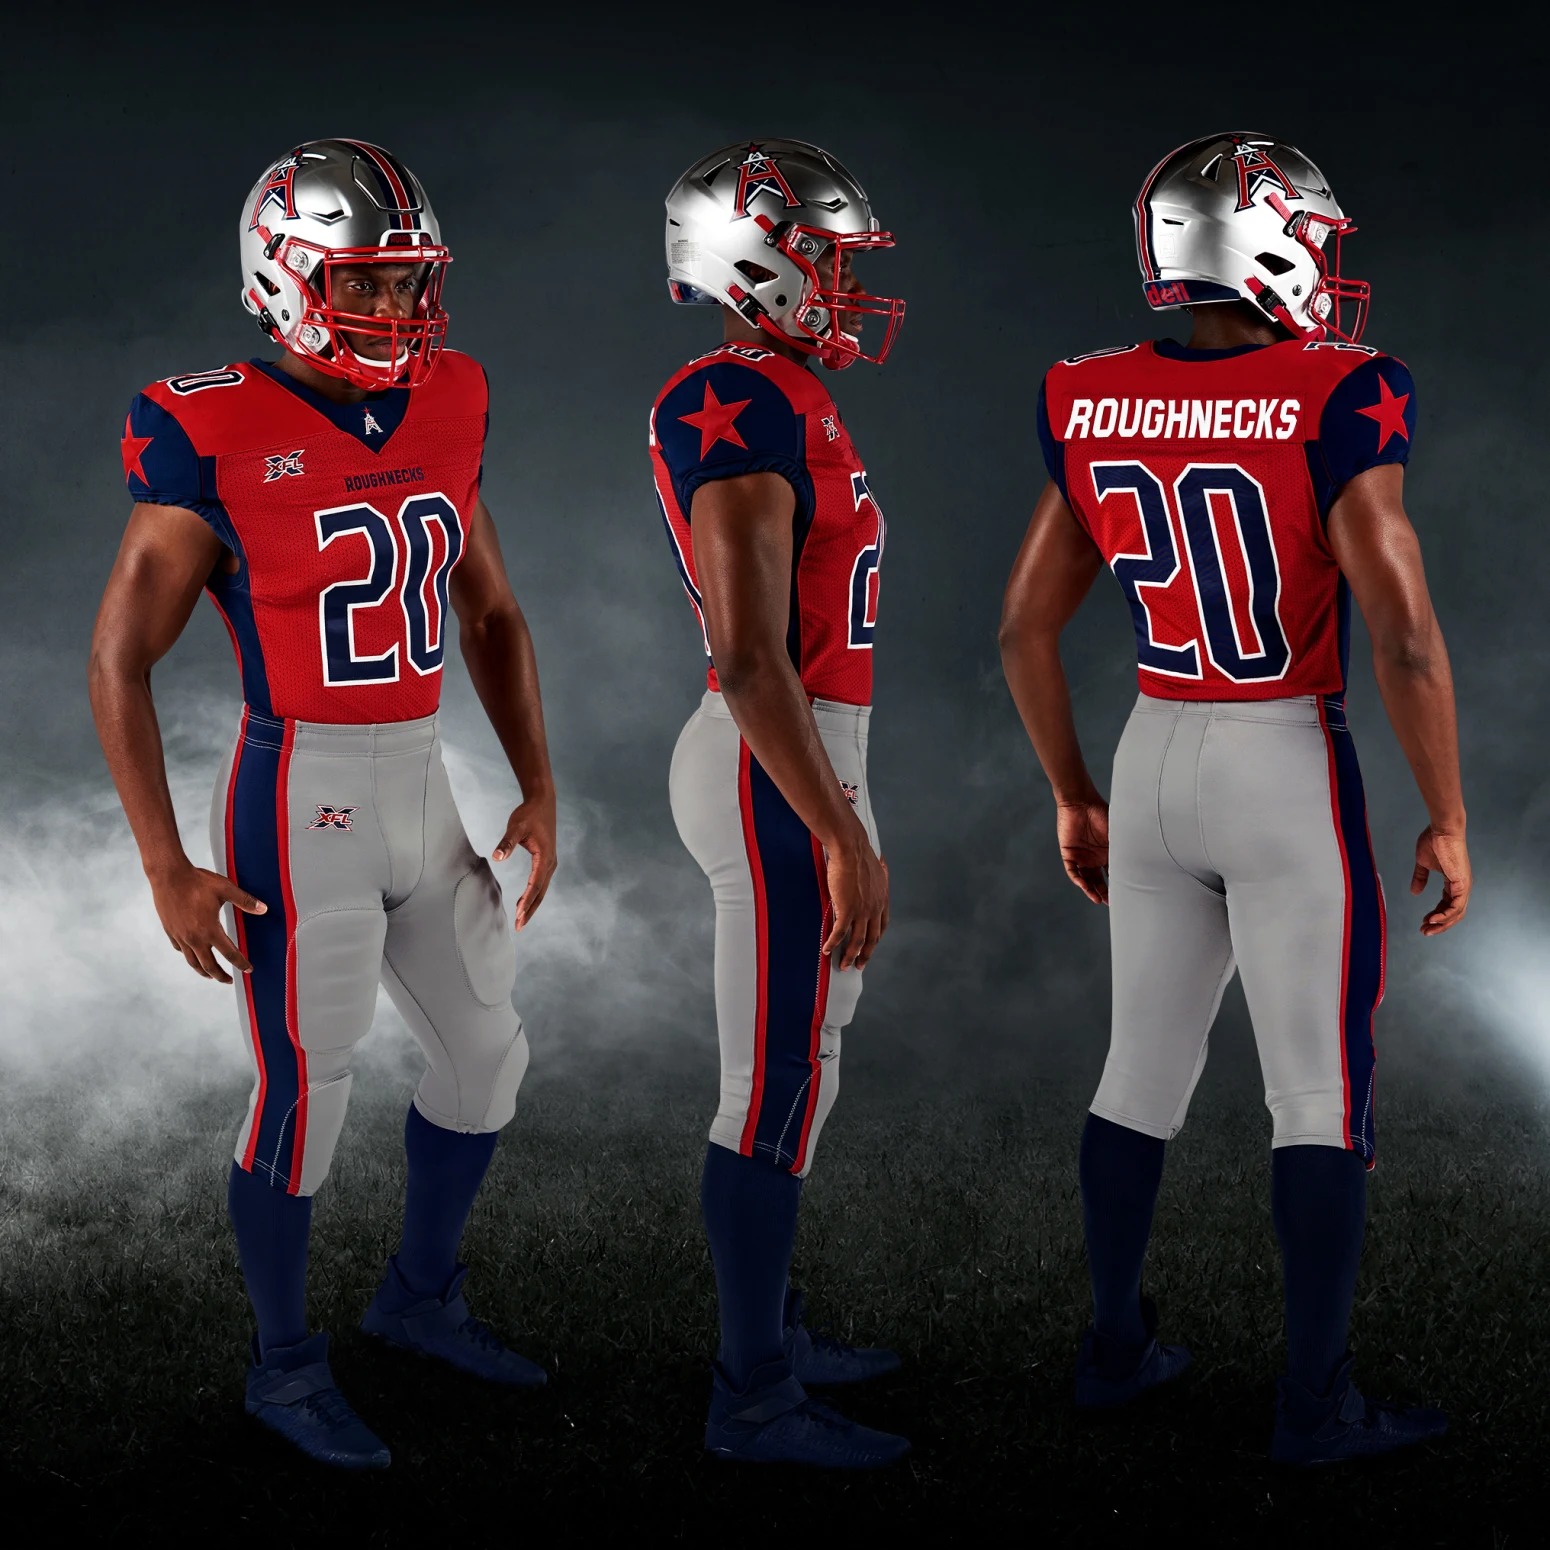 Poll Result: Fans feel the Seattle Dragons have the best uniforms